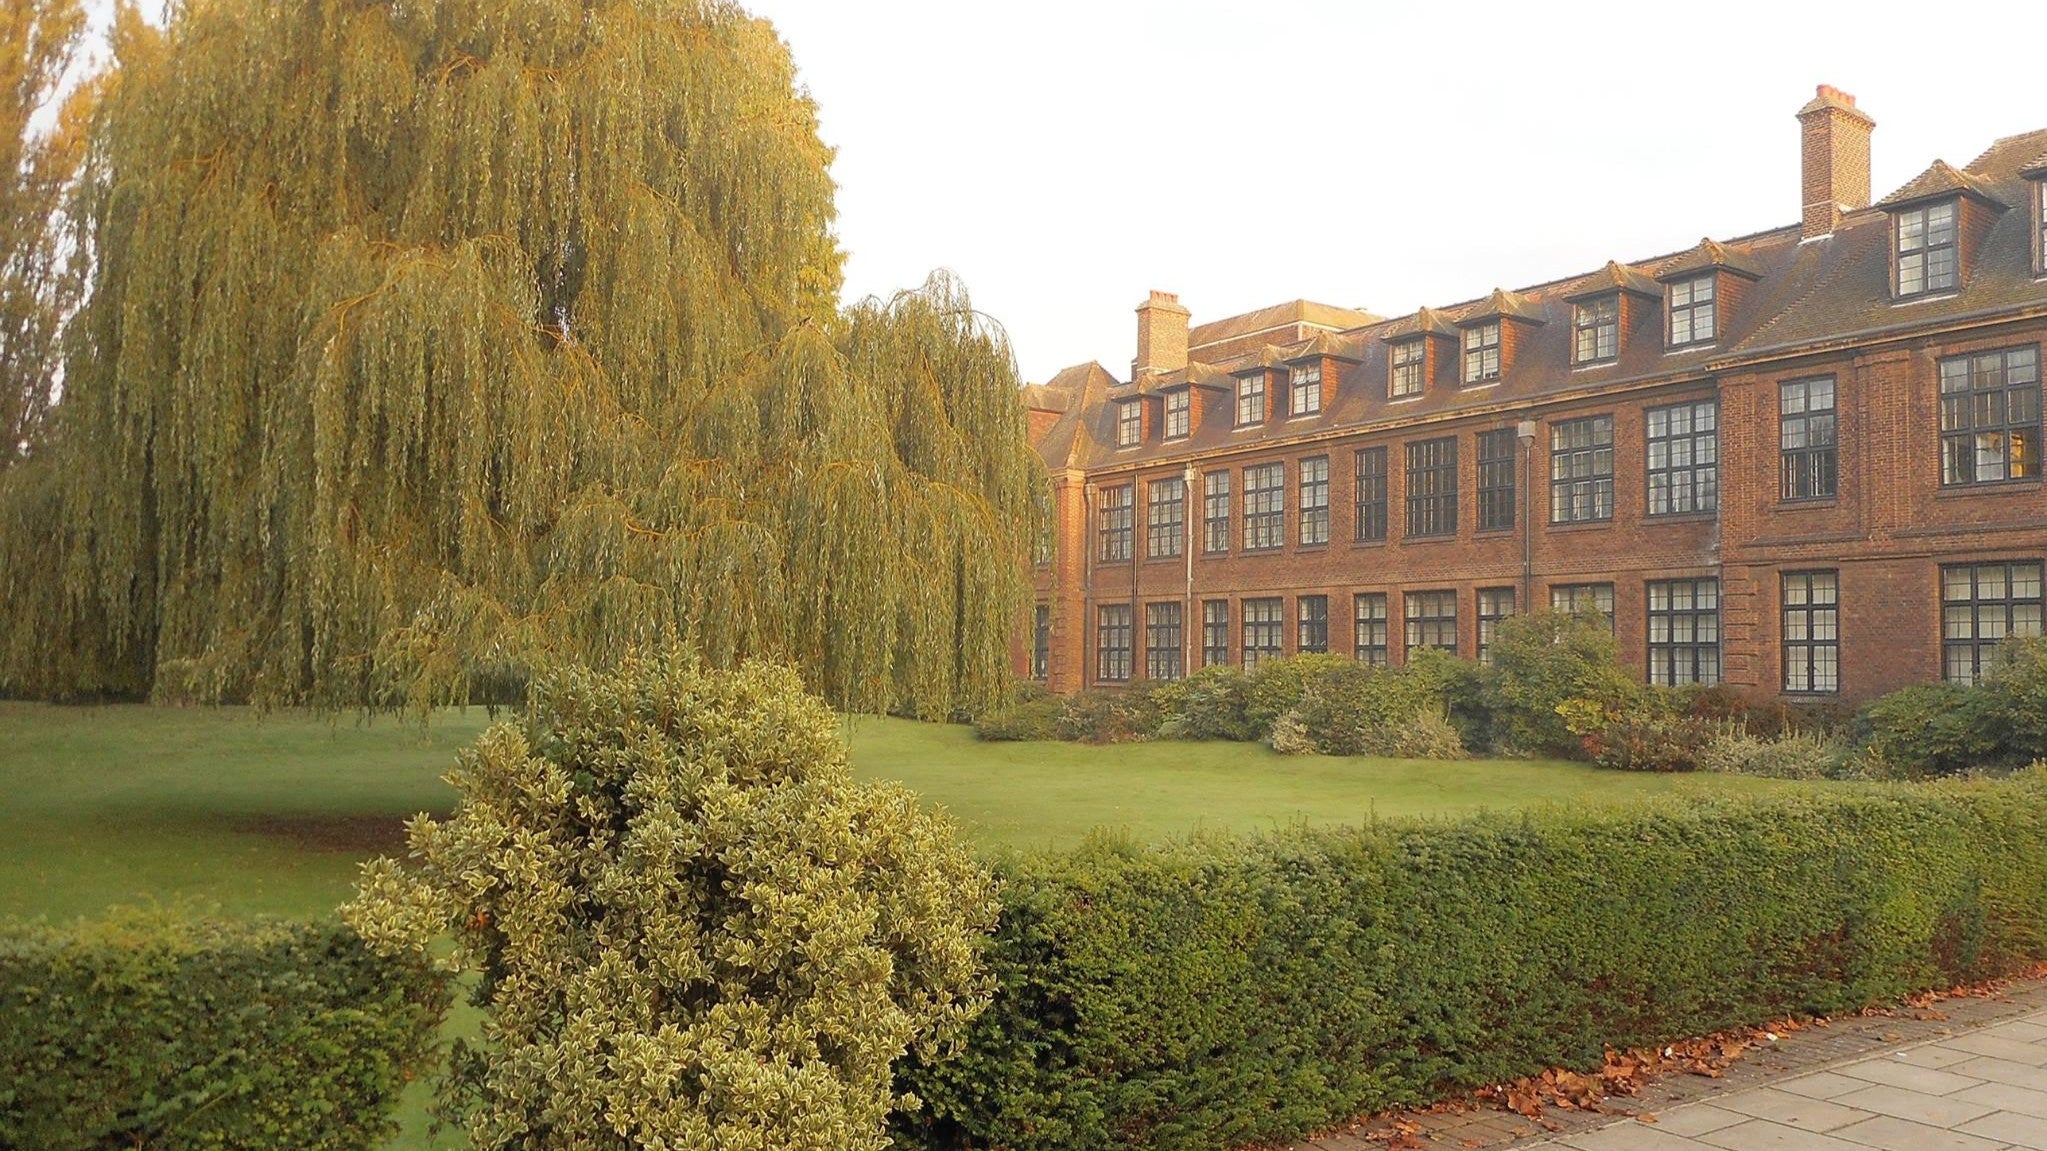 The University of Hull, pictured (Image credit: The University of Hull via Facebook)